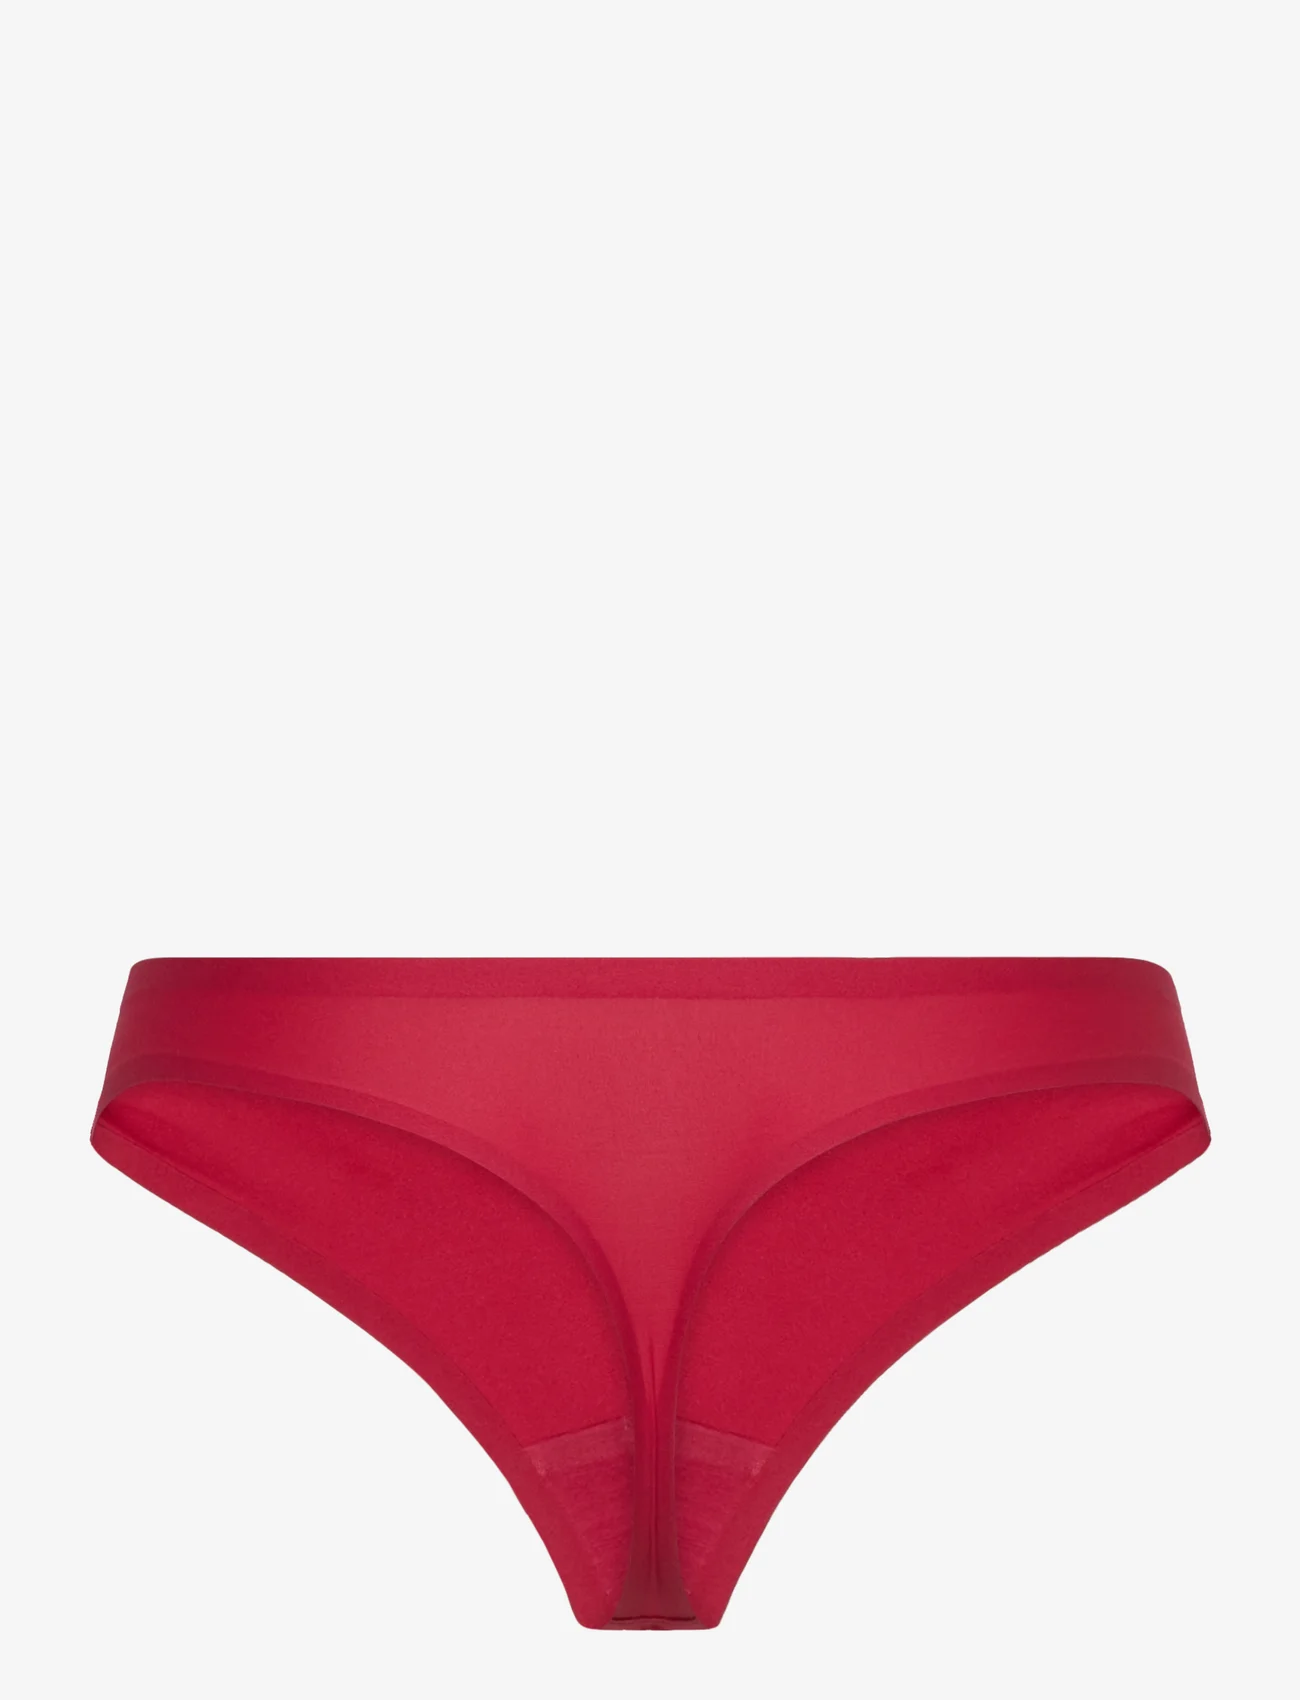 CHANTELLE - Softstretch Thong - nahtlose slips - passion red - 1